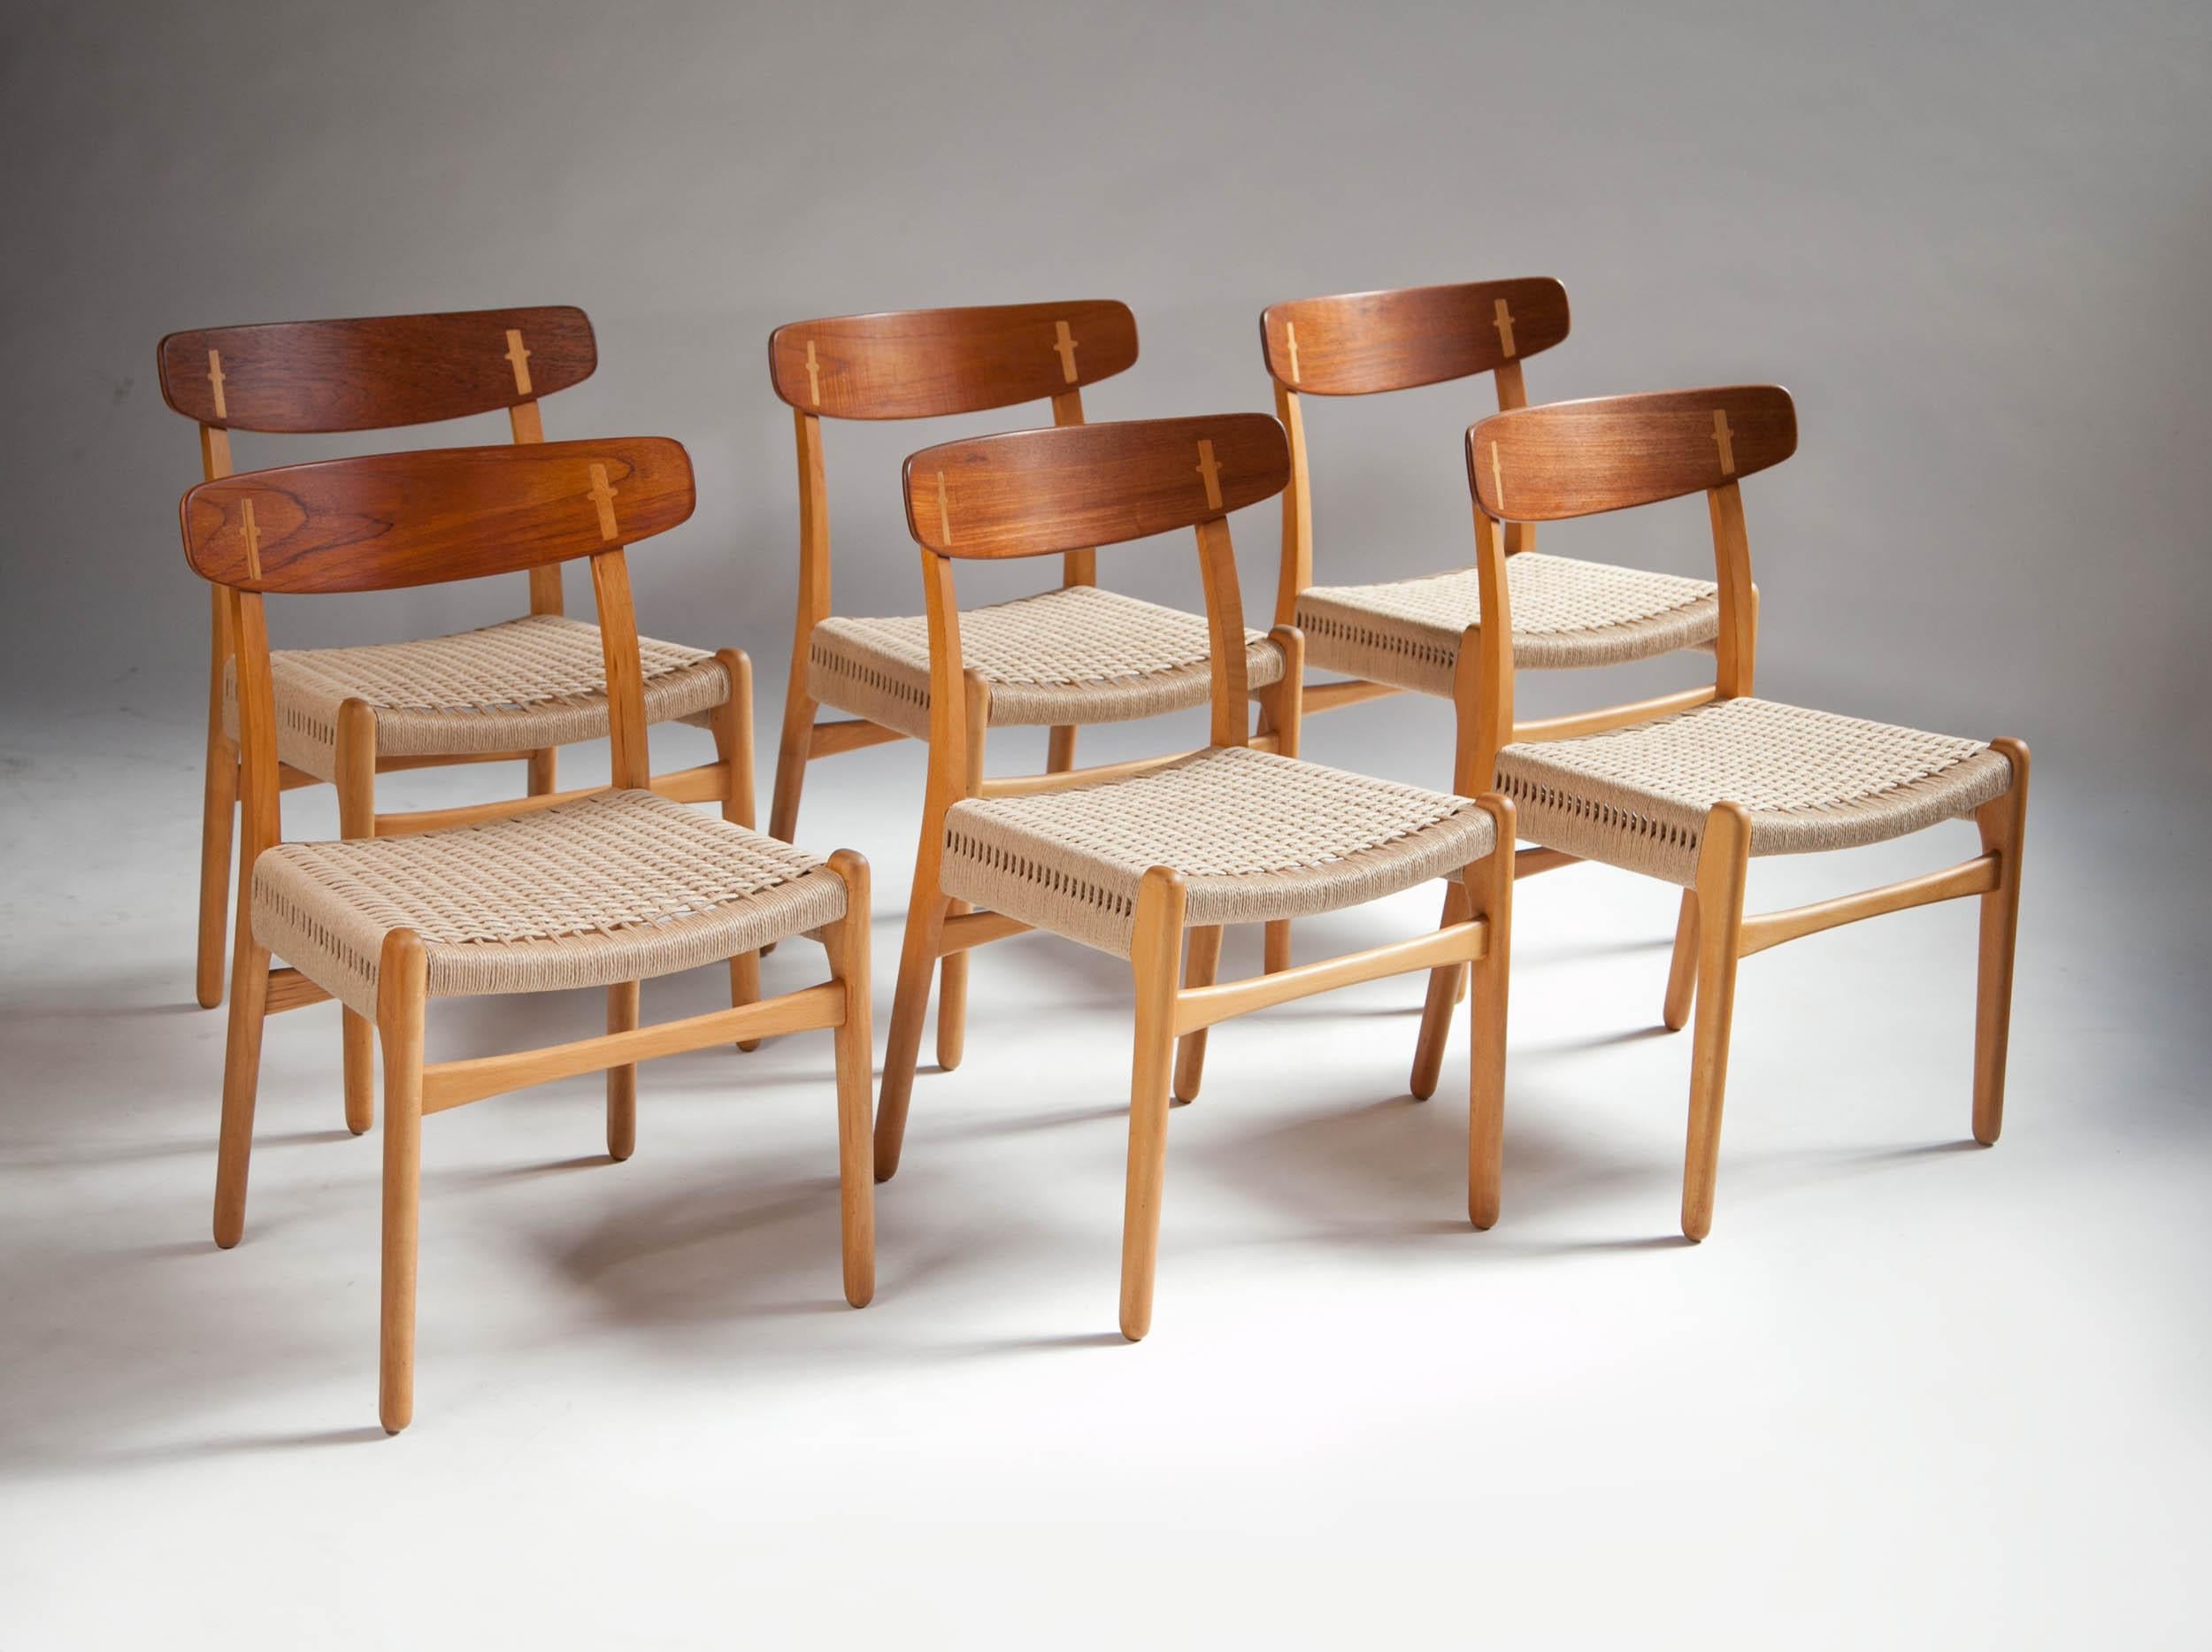 Hans J. Wegner CH-23 dining chairs, set of 6, Denmark

This is a beautiful and rare set of six Hans J. Wegner model CH-23 teak and beech dining chairs produced by Carl Hansen & Son in Denmark. First introduced in 1950 by famed Danish designer Hans